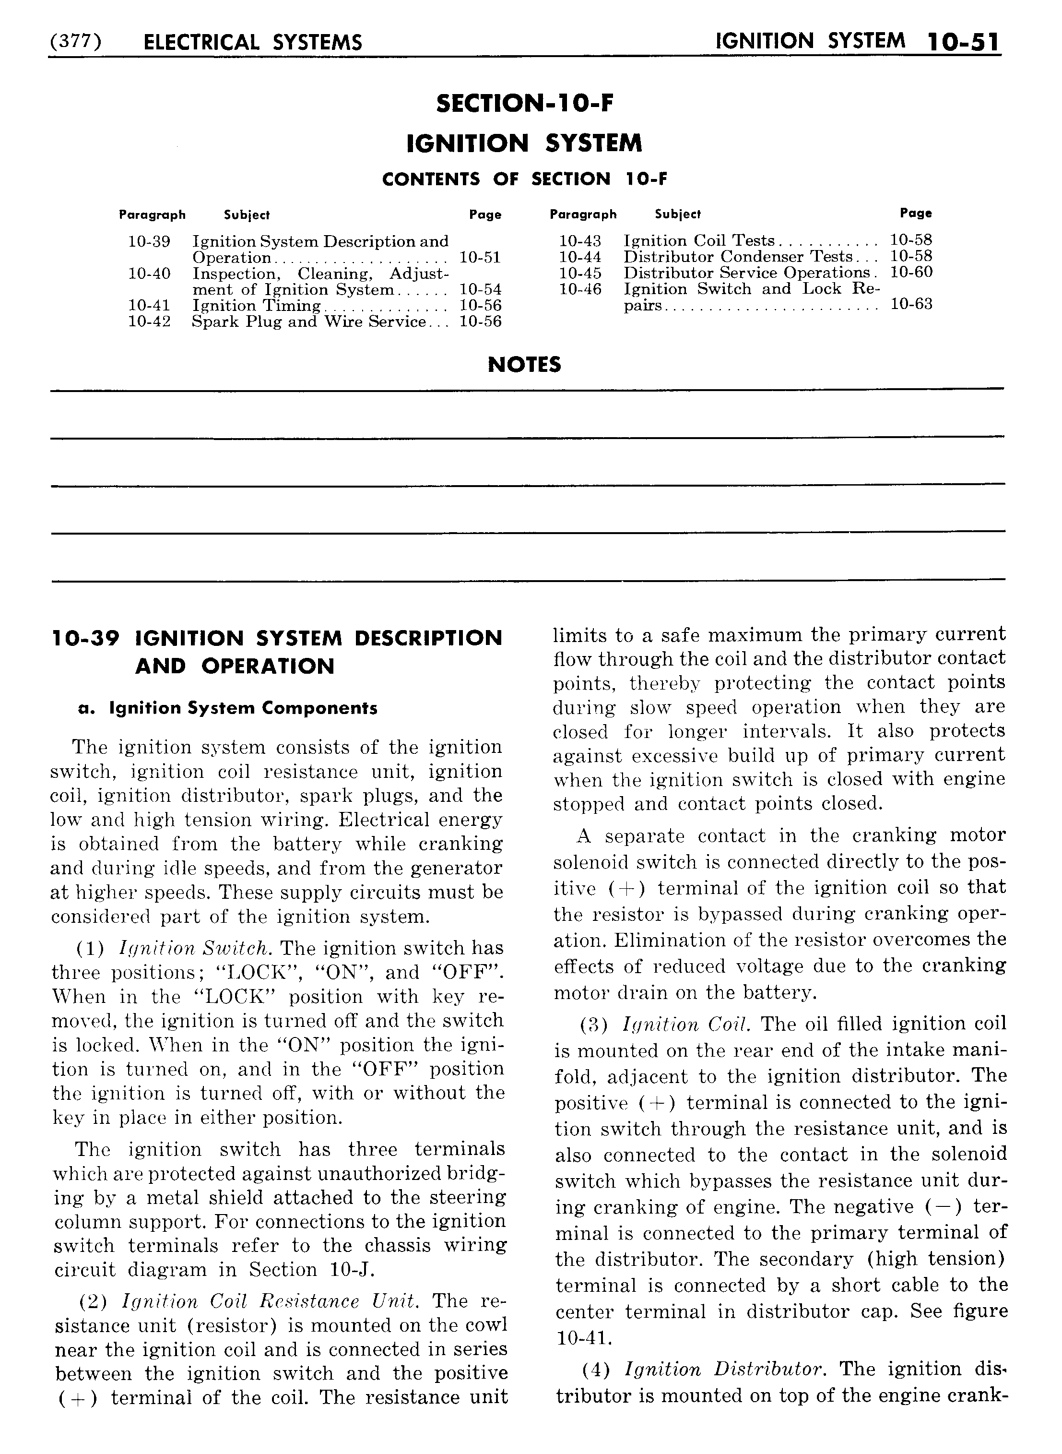 n_11 1956 Buick Shop Manual - Electrical Systems-051-051.jpg